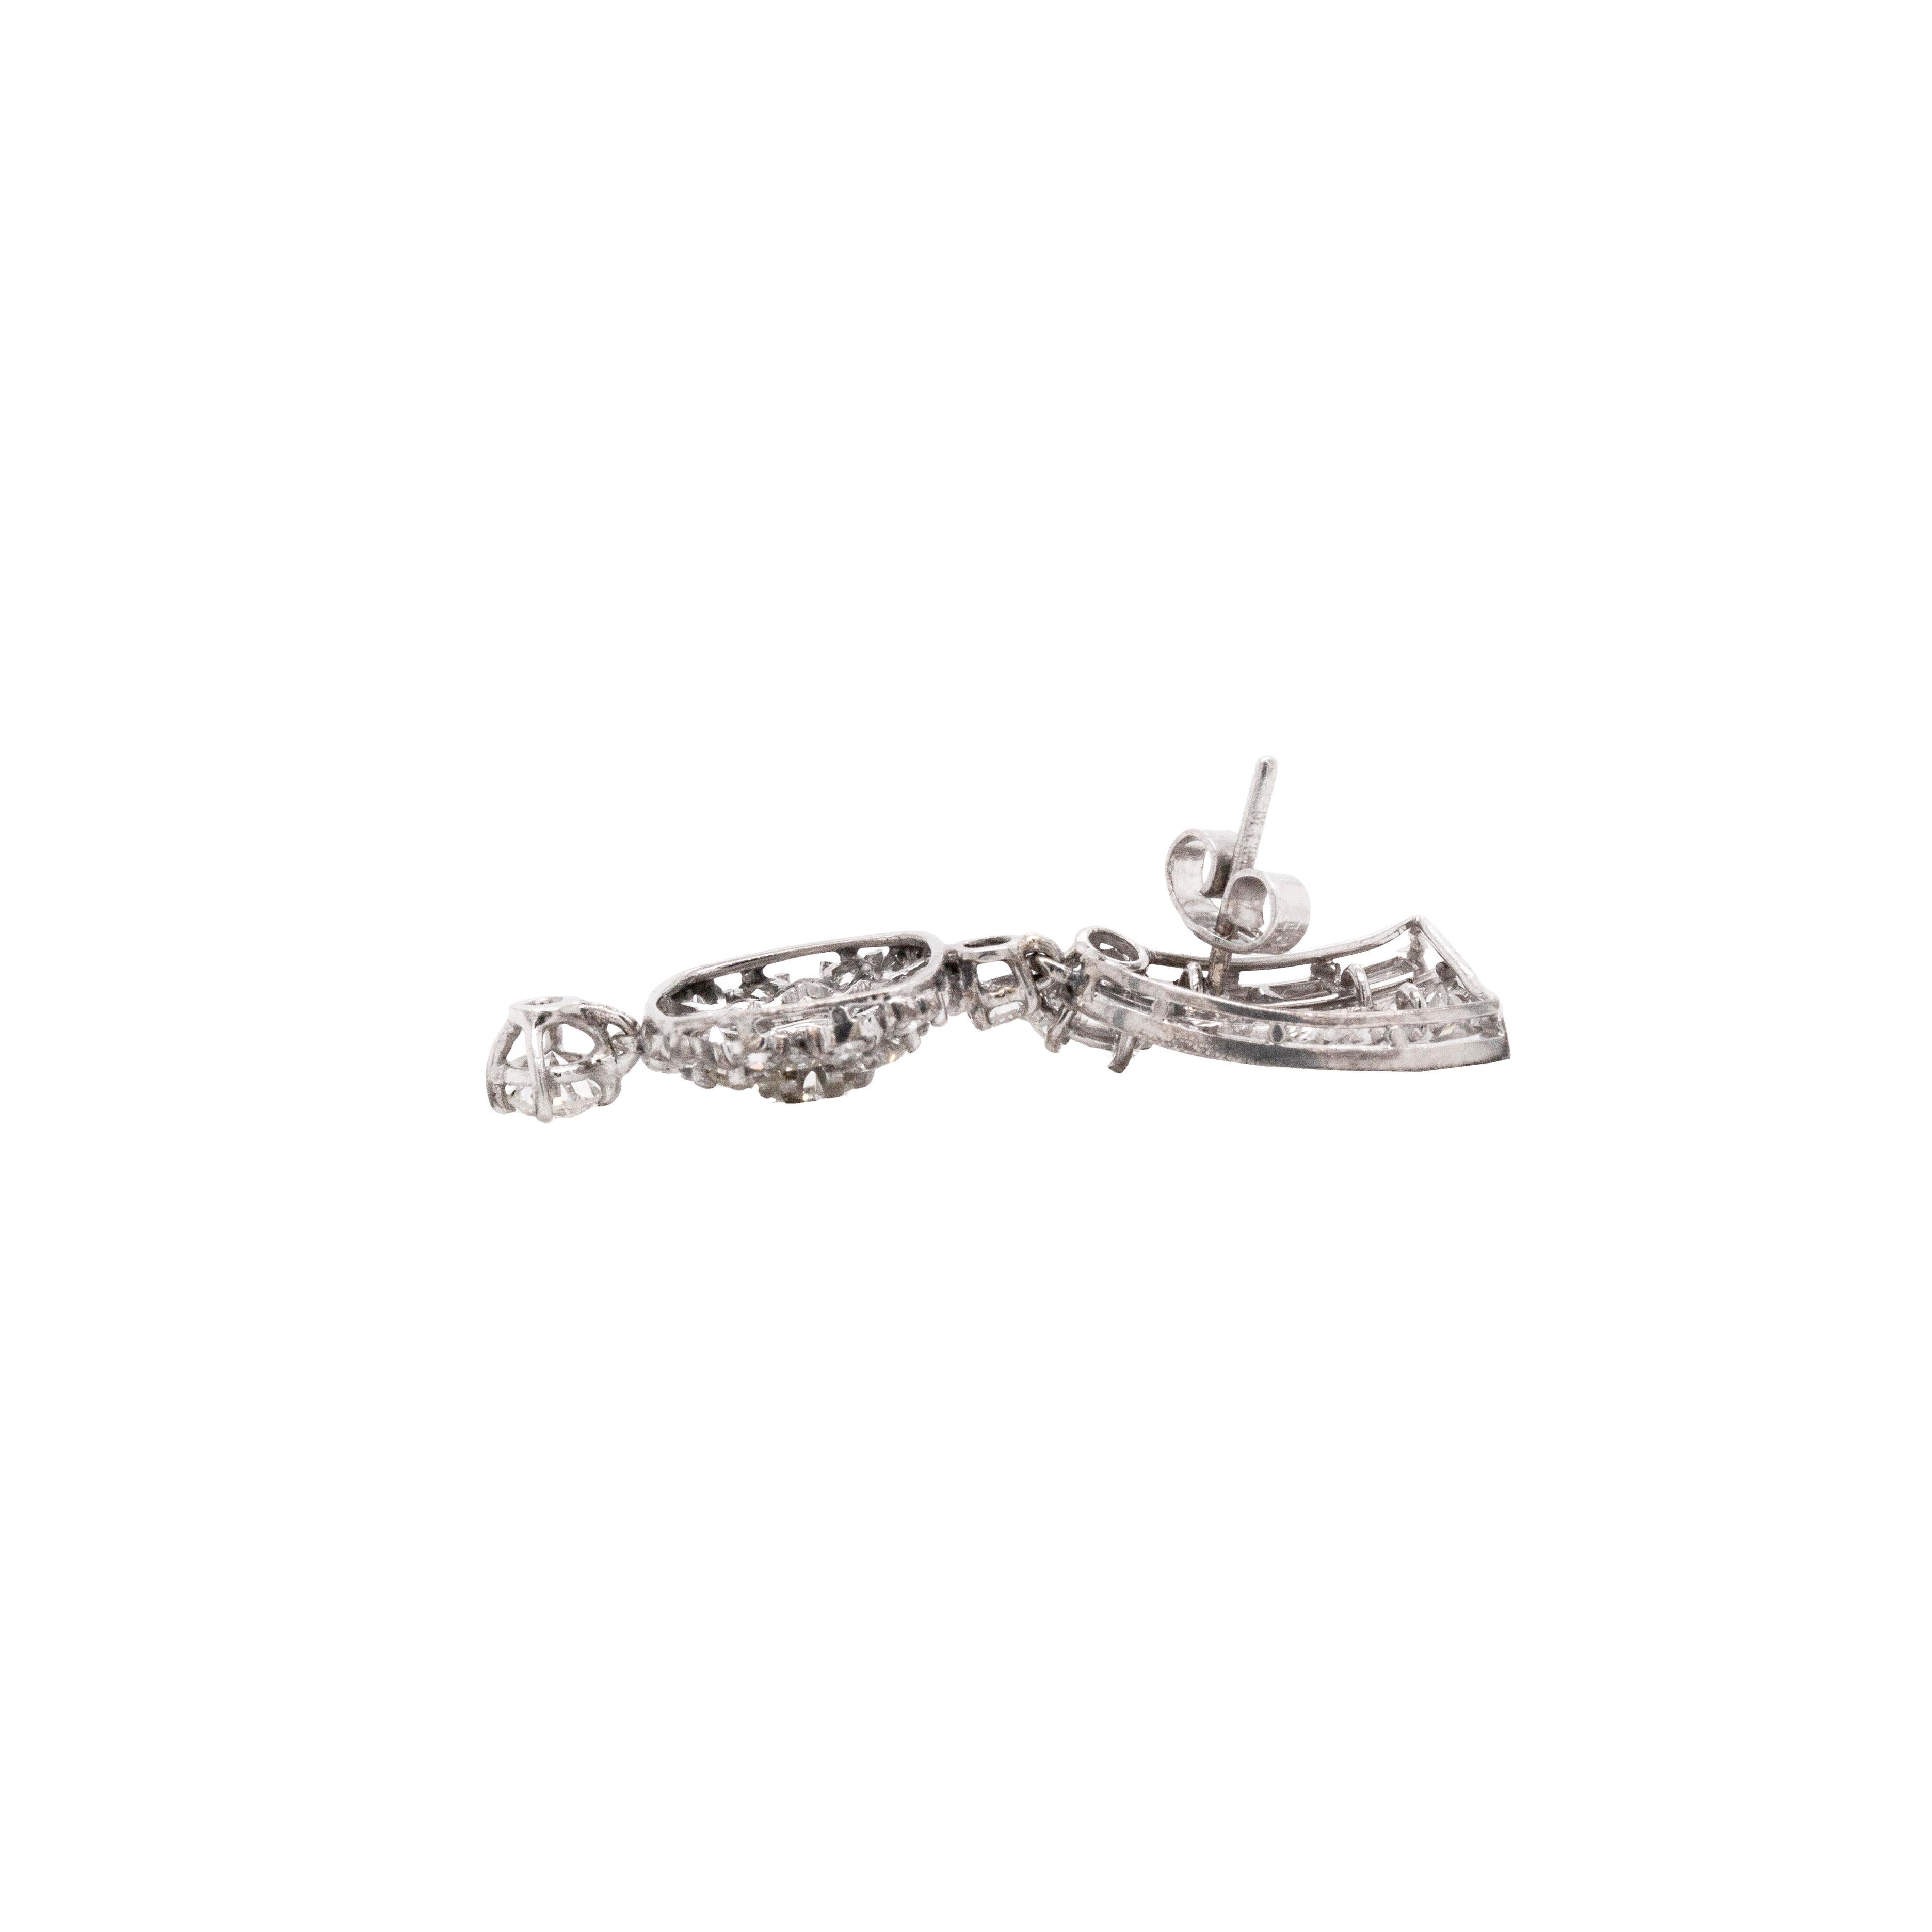 These stunning 1950s 18ct white gold and diamond earrings boast an estimated total of 3.70 carats of round brilliant cut, baguette and eight-cut diamonds across the pair. 

Beautifully crafted and set with a stud fixture, these earrings are designed